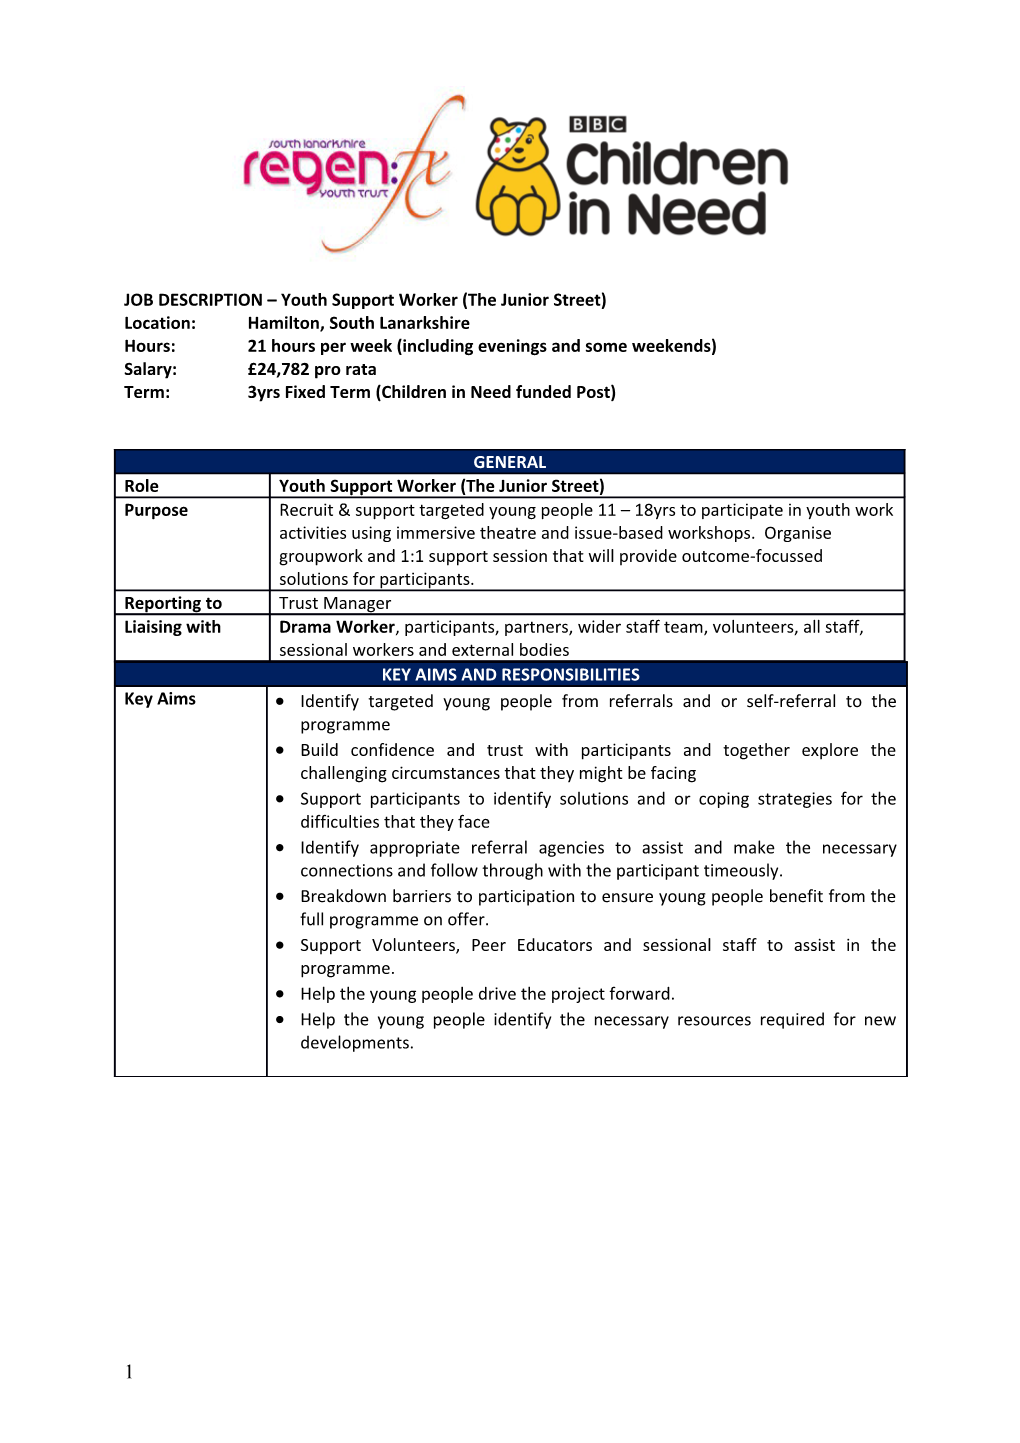 JOB DESCRIPTION Youth Support Worker (The Junior Street)